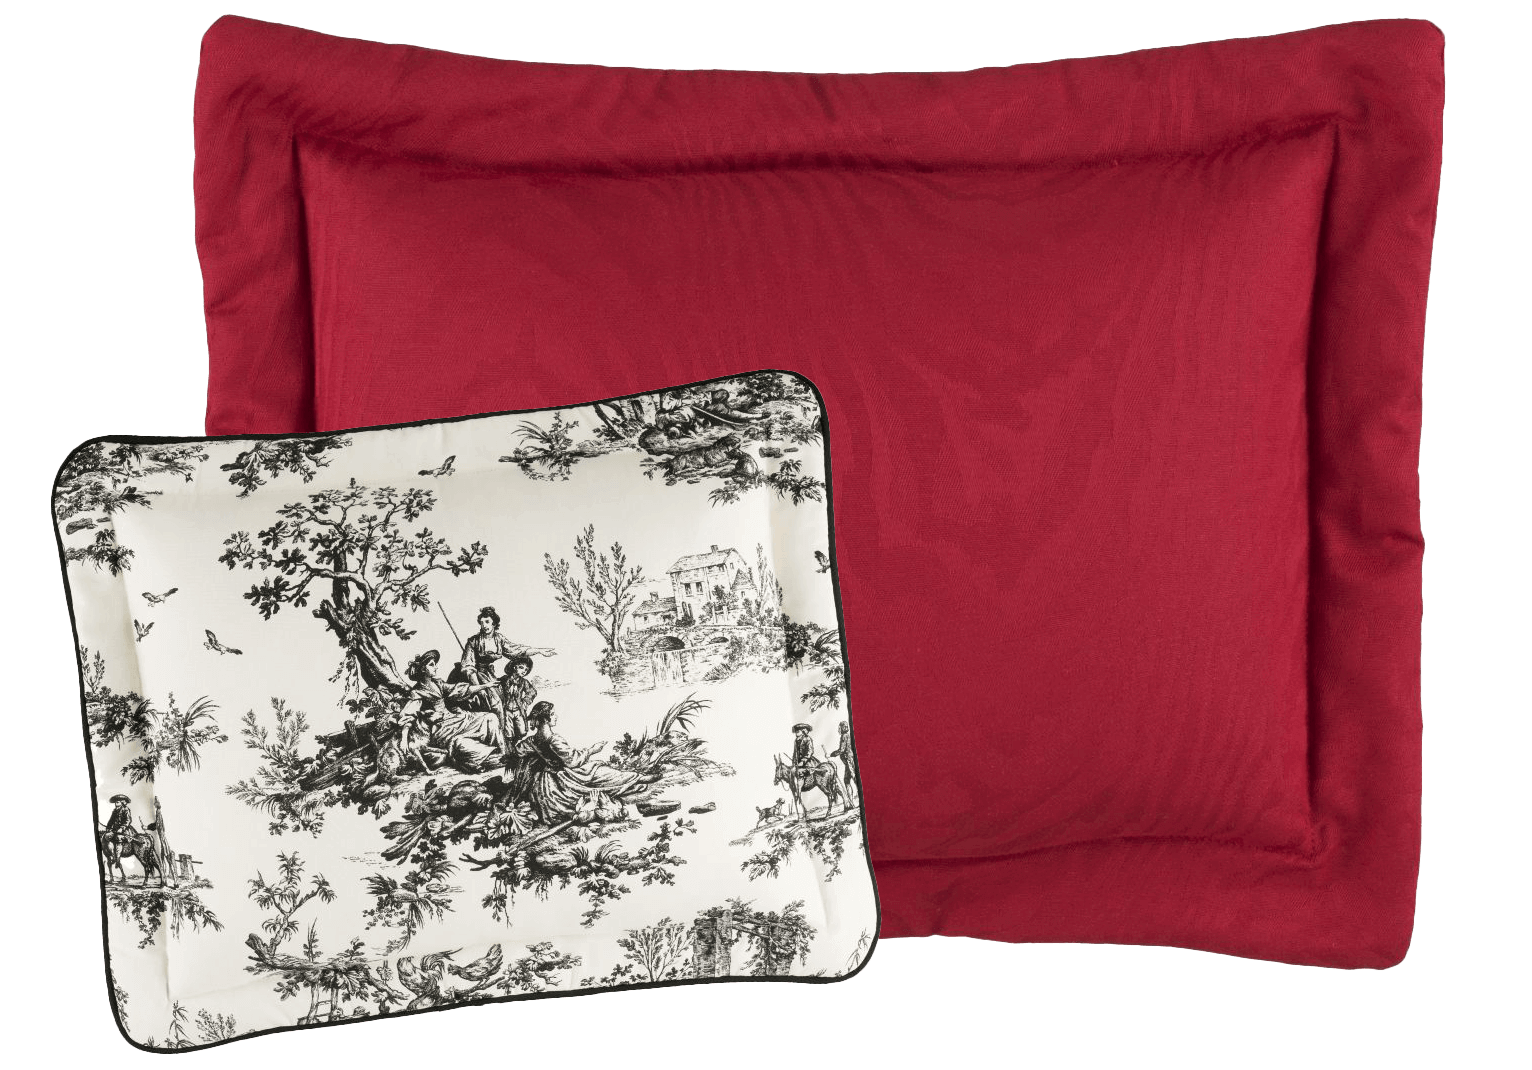 Bouvier Pillows - one Red and one with the Bouvier Black pattern